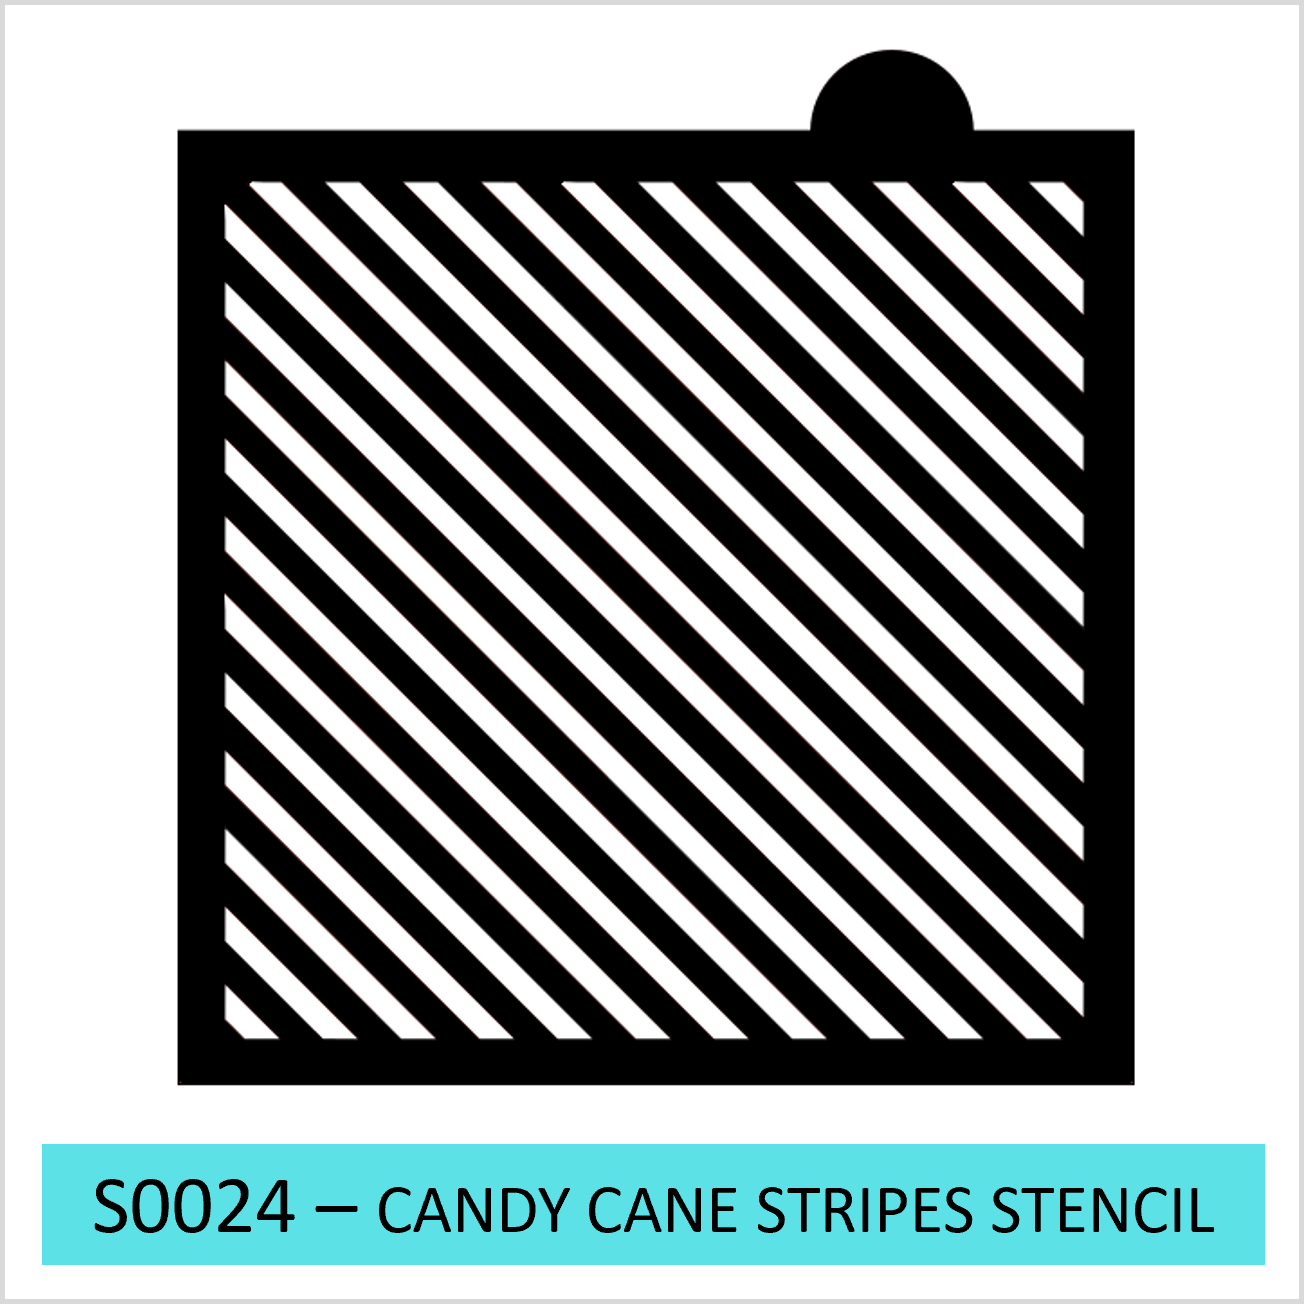 S0024 - Candy Cane Stripes